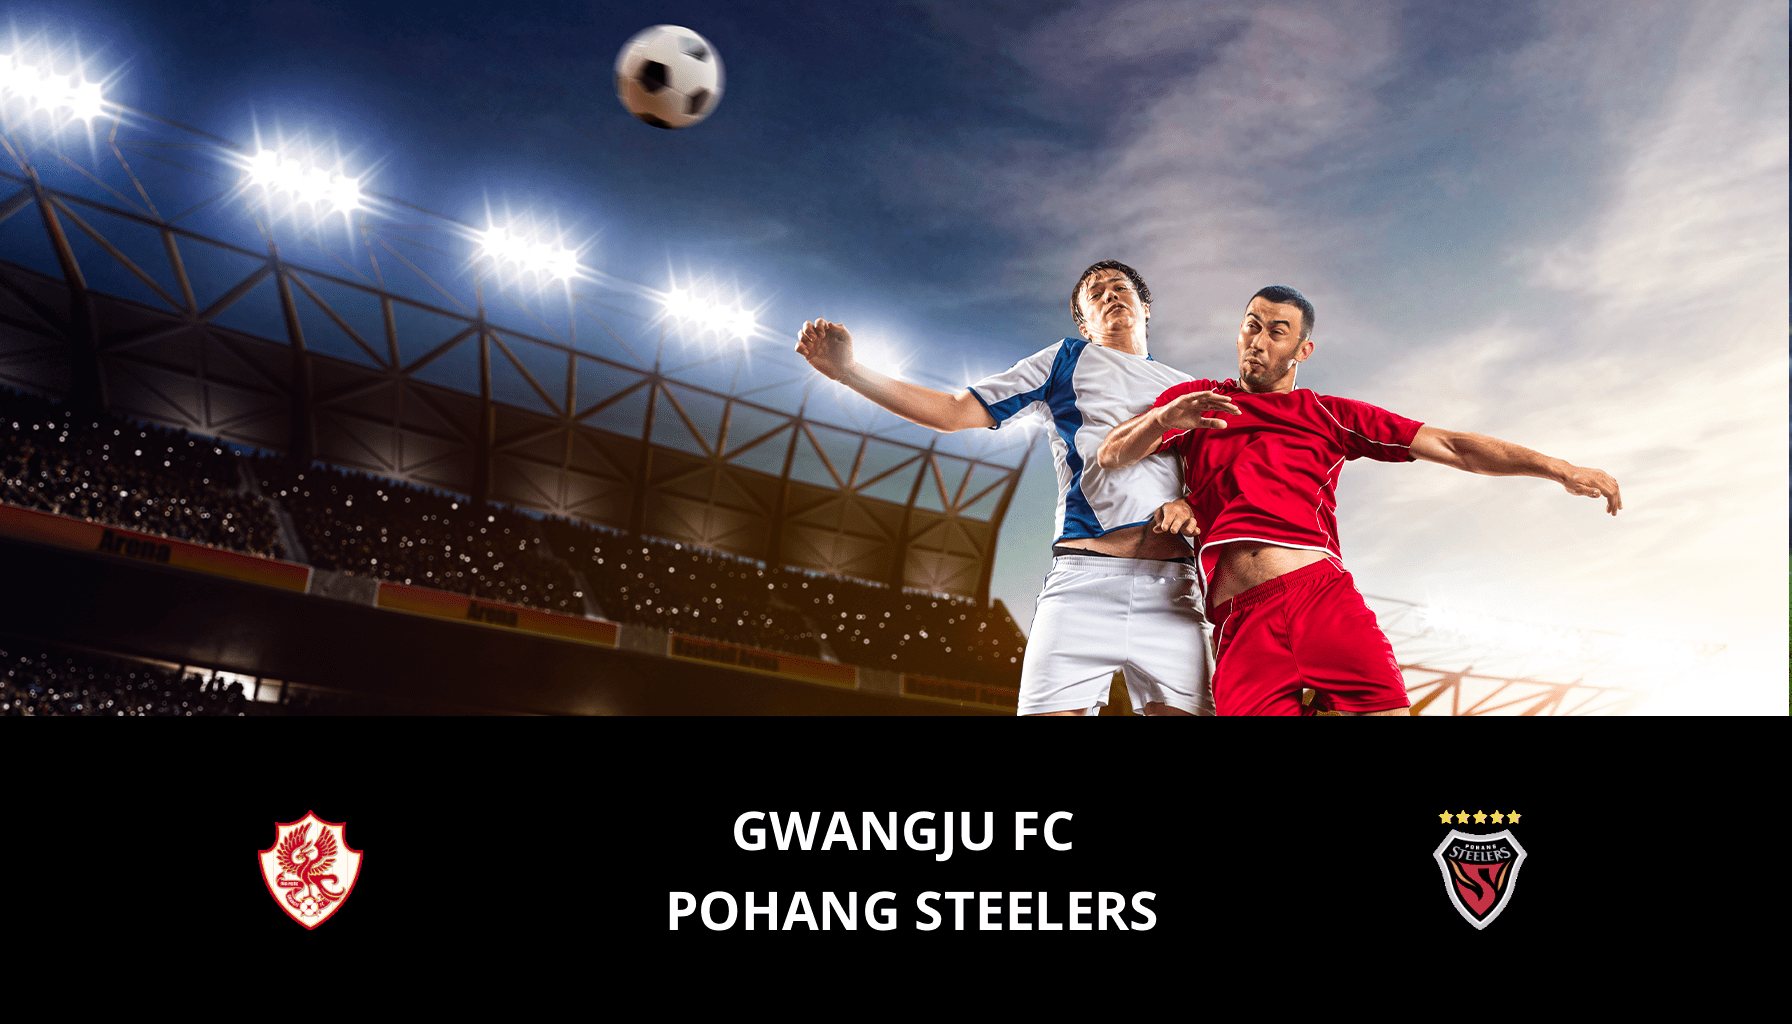 Previsione per Gwangju FC VS Pohang Steelers il 03/12/2023 Analysis of the match